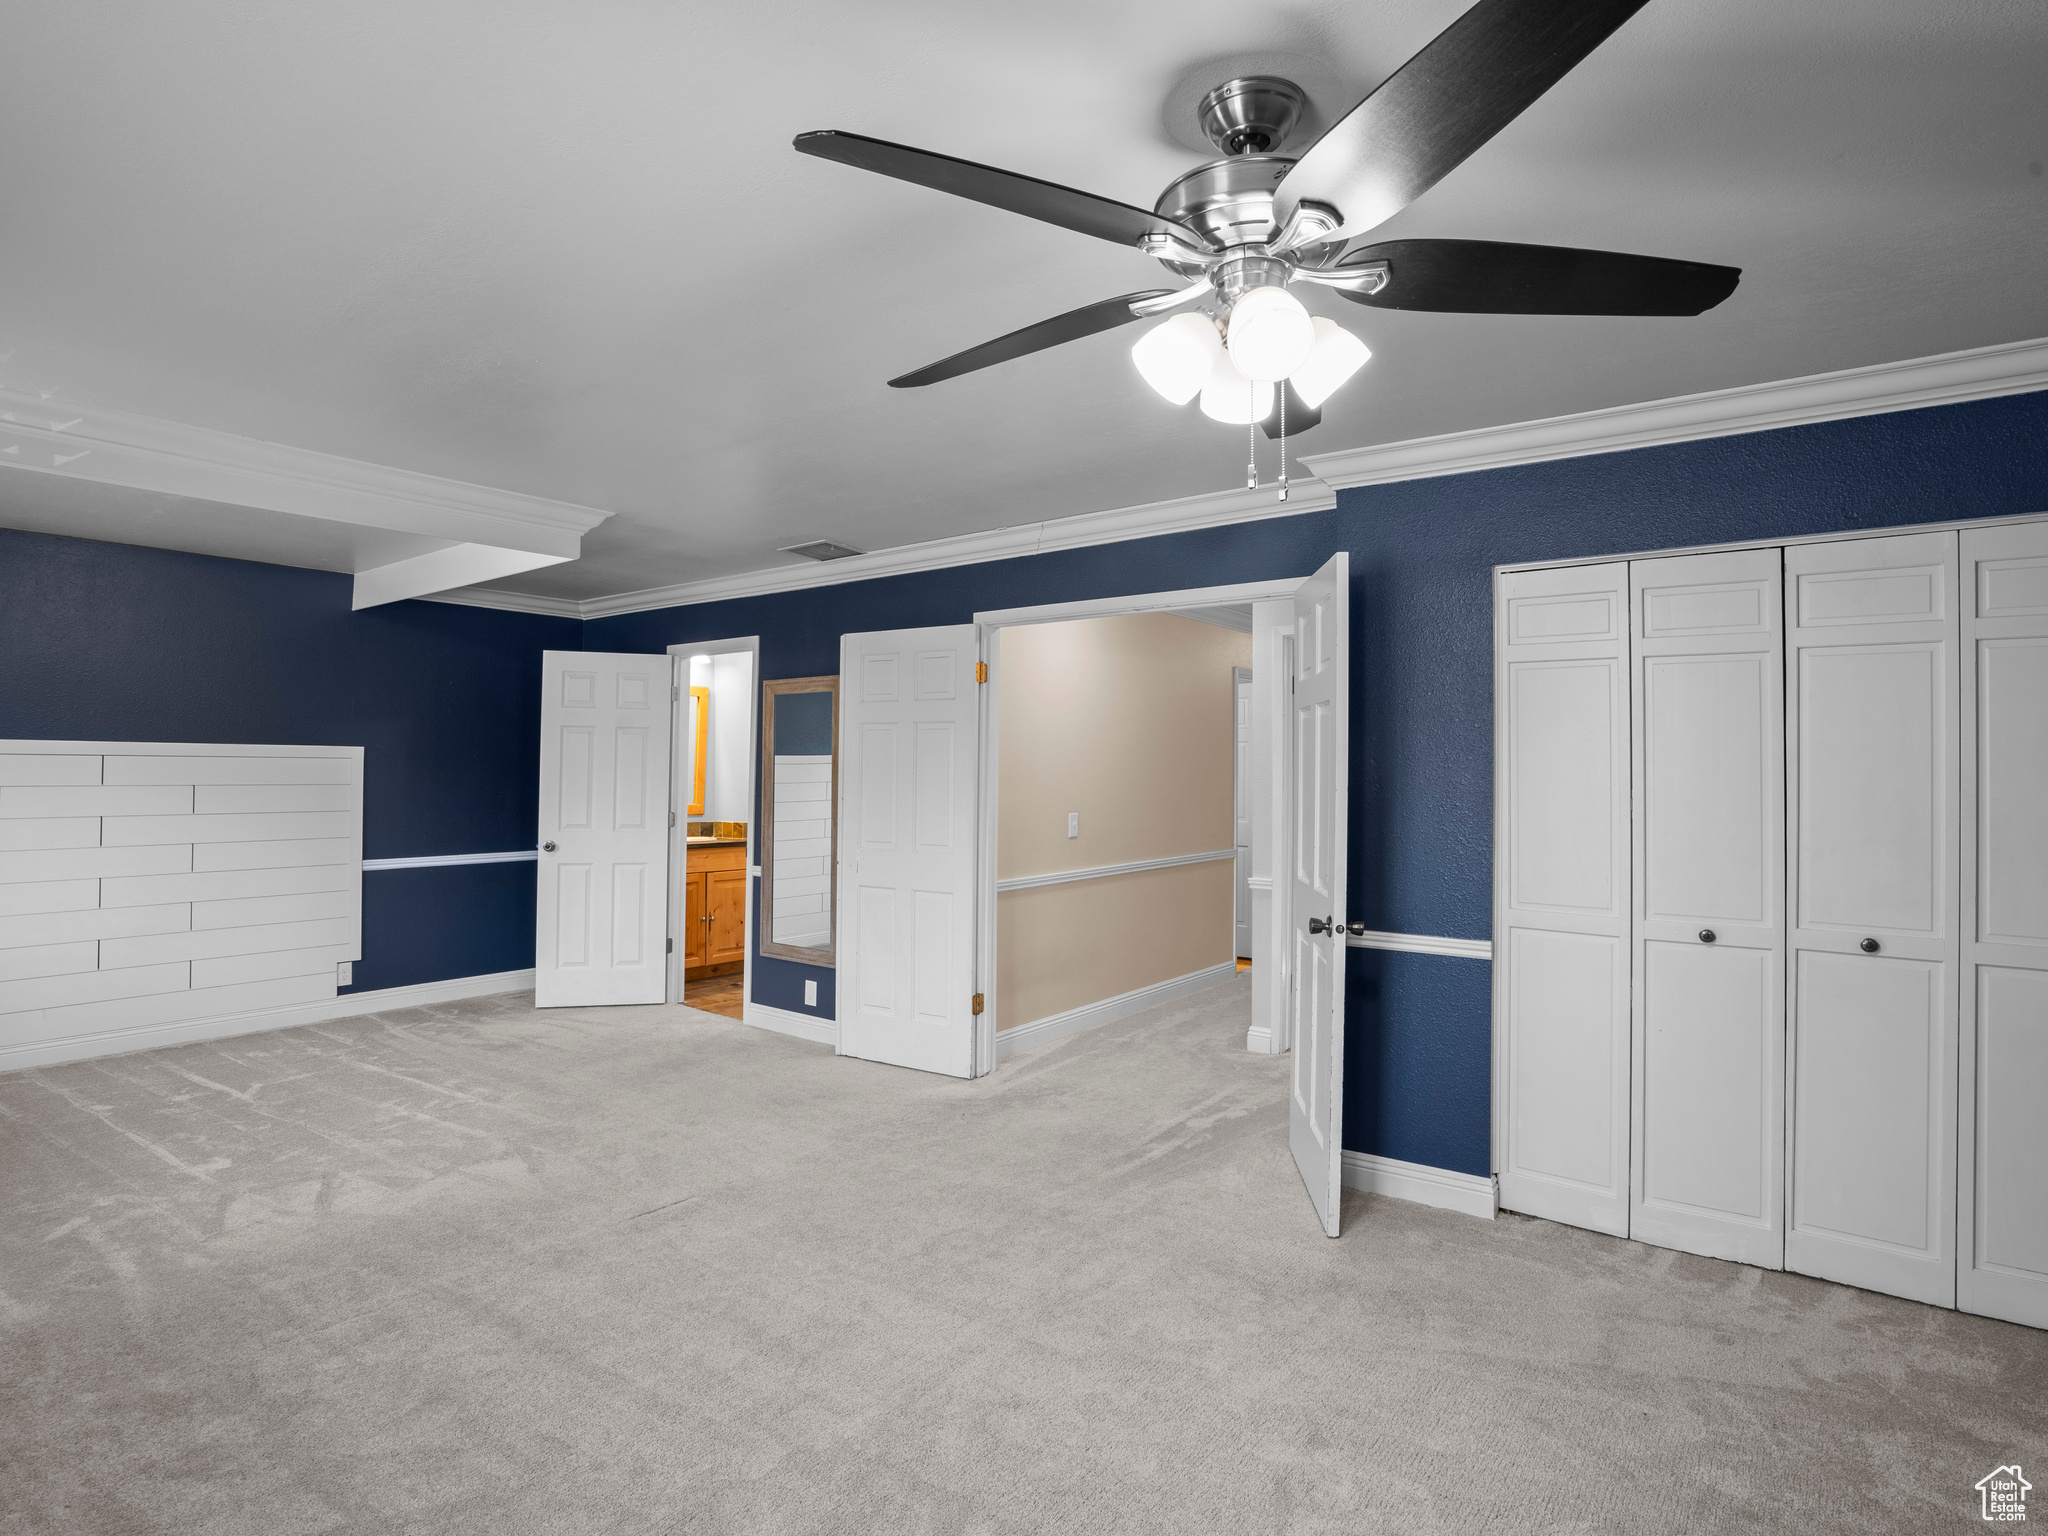 Unfurnished bedroom with light colored carpet, ceiling fan, and ornamental molding